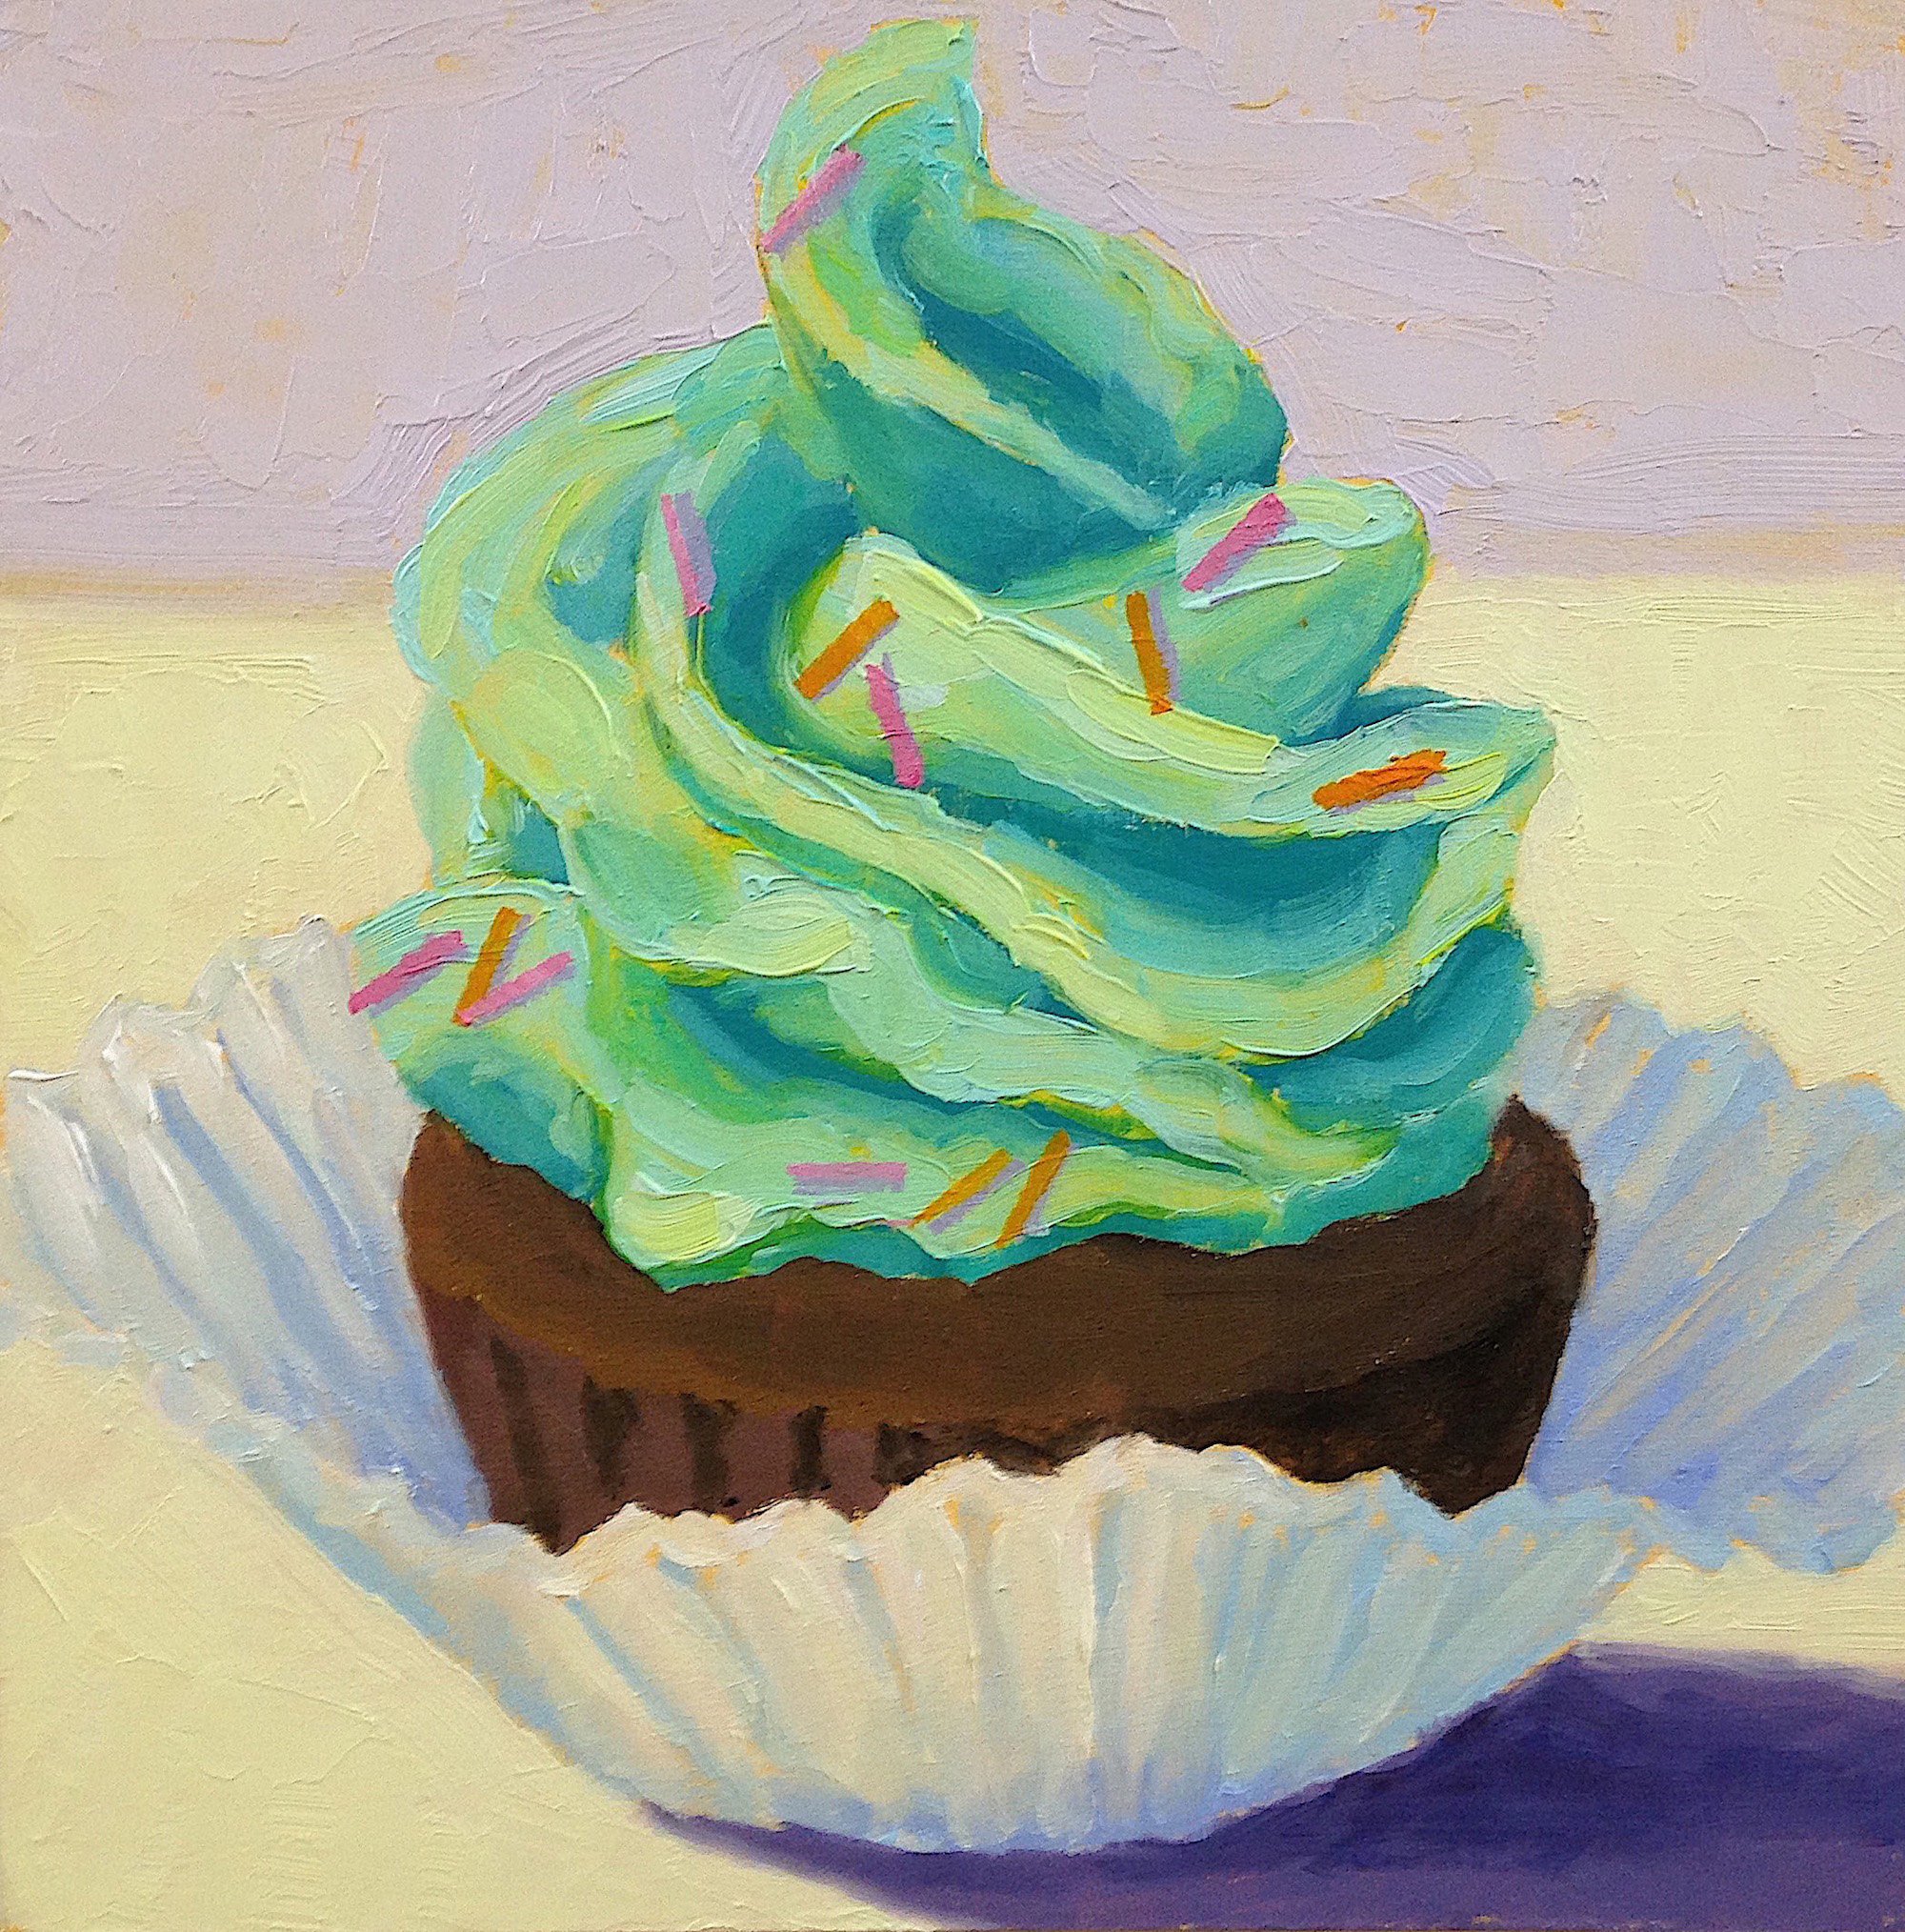 Mint Chocolate Chip by Pat Doherty